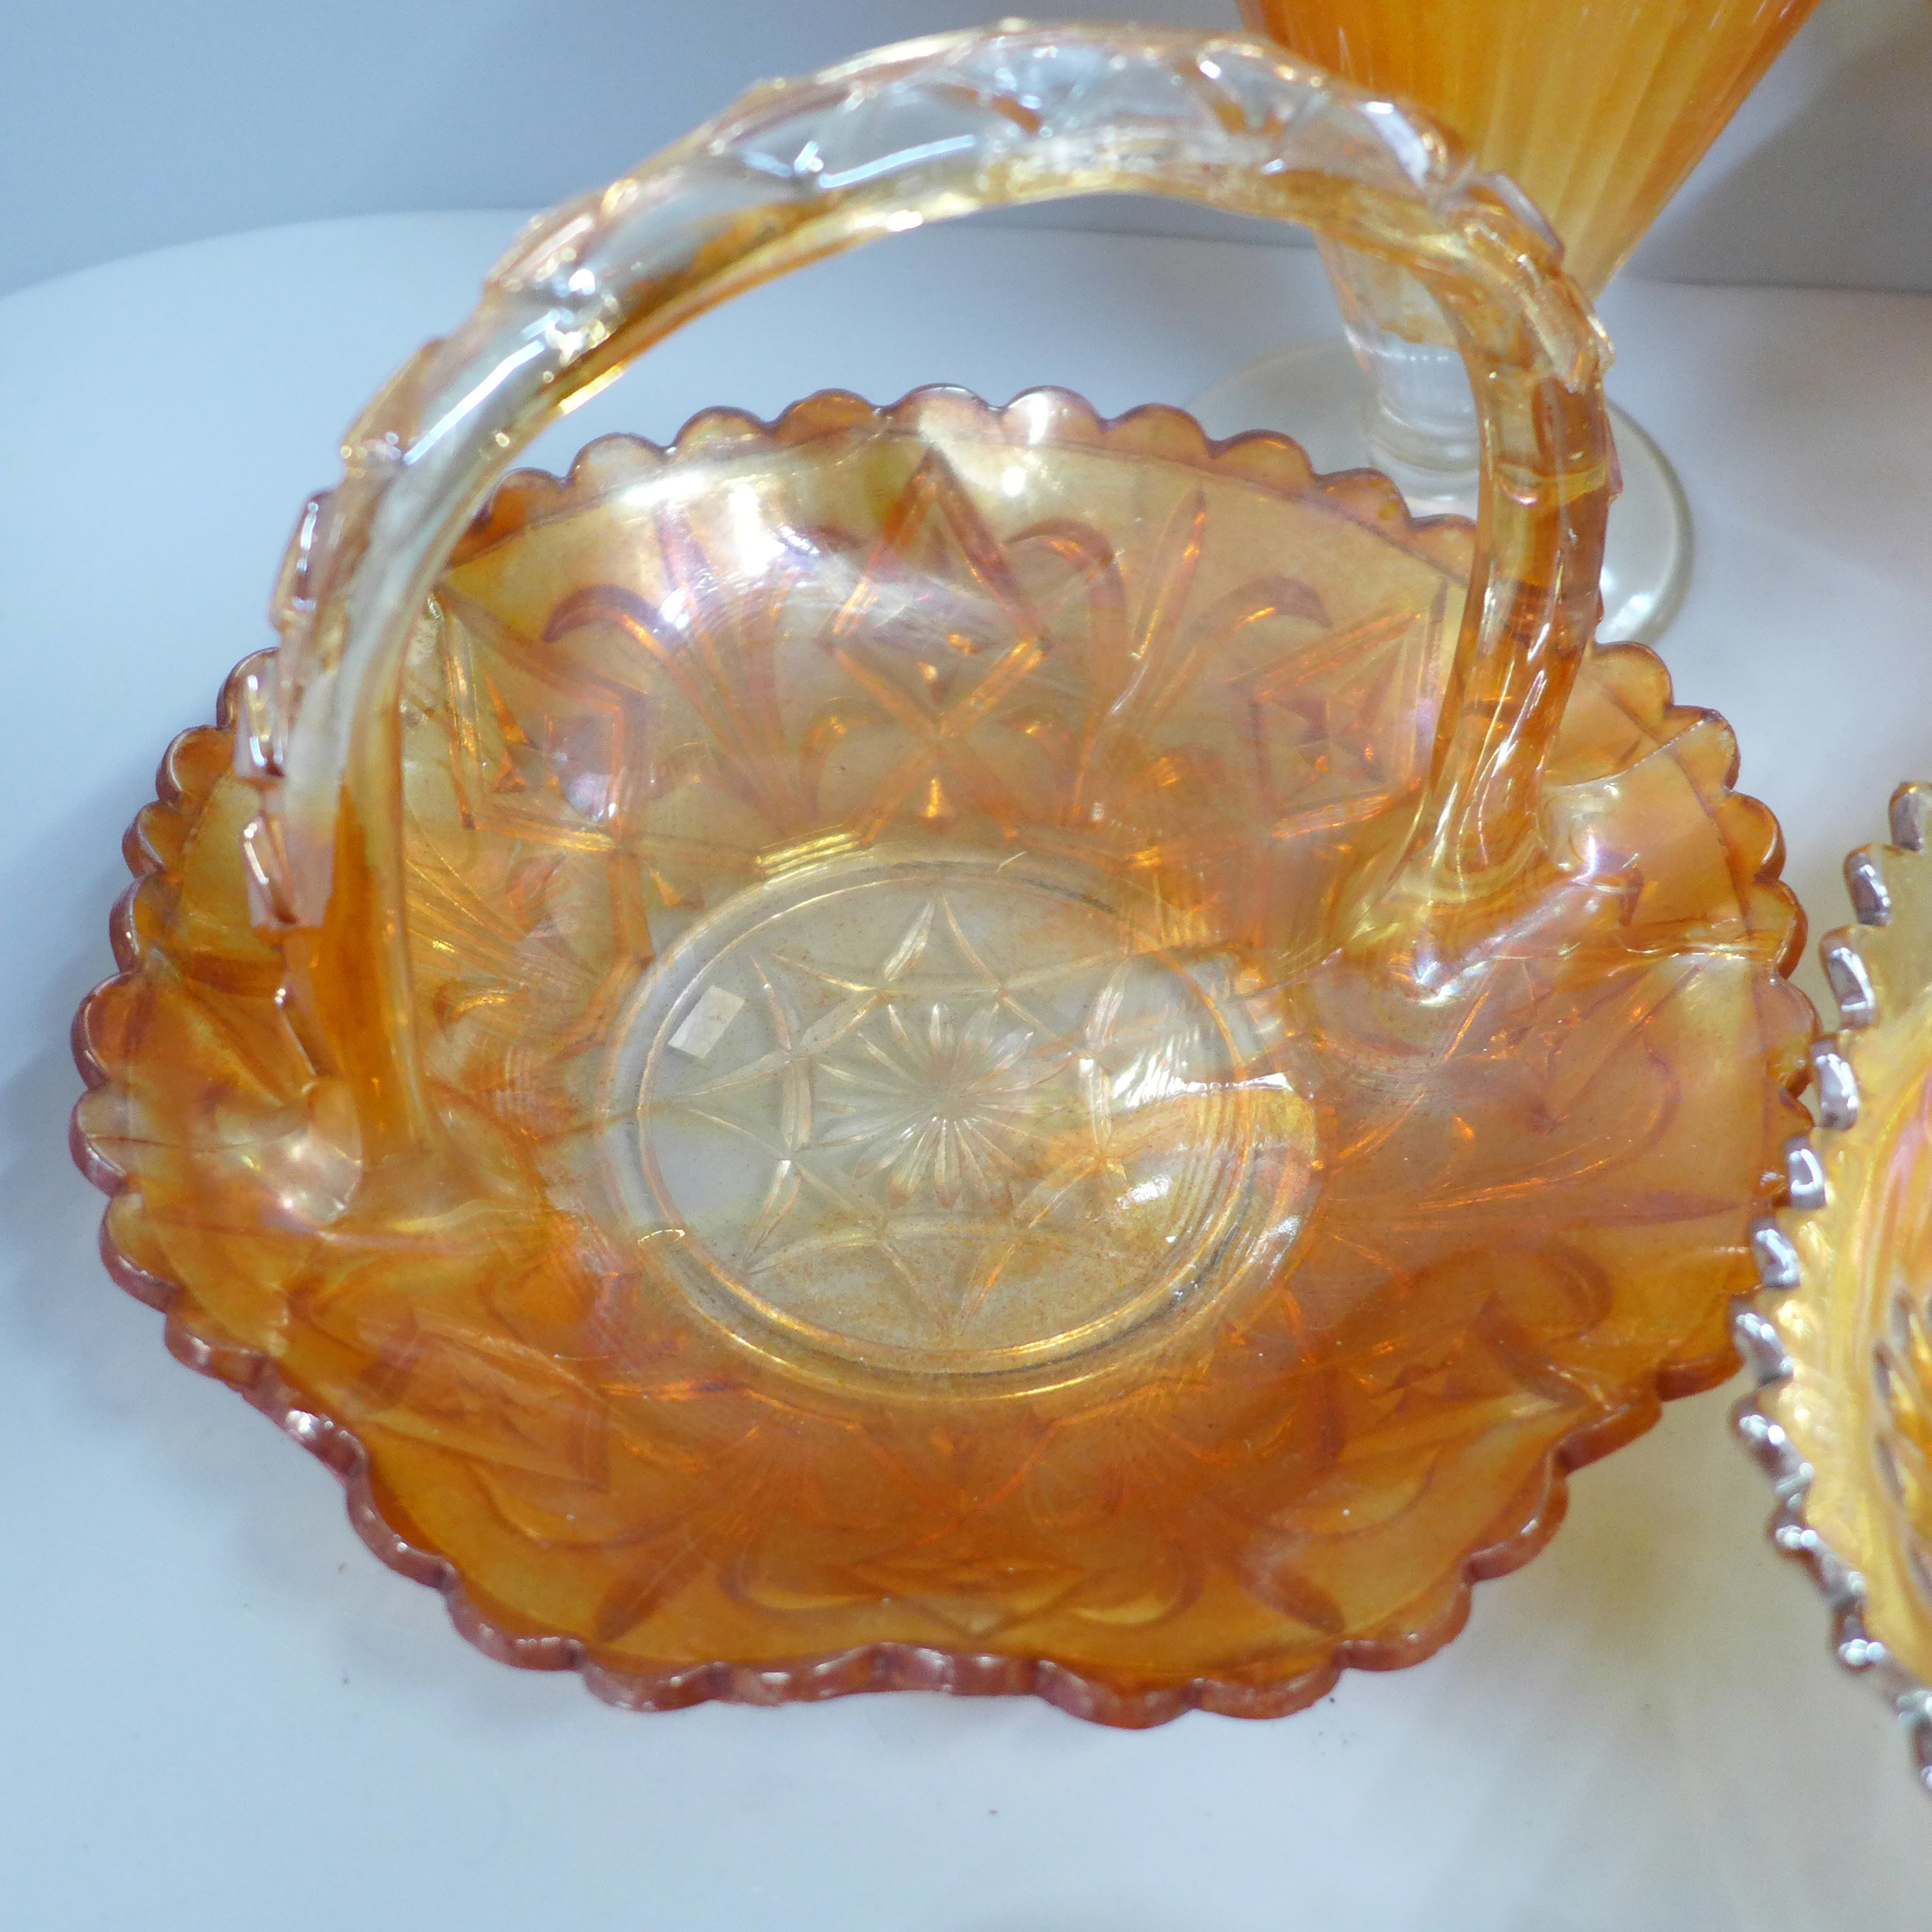 Ten items of marigold carnival glass, a crackle glaze celery vase, iridescent dished and bowls, - Image 3 of 8